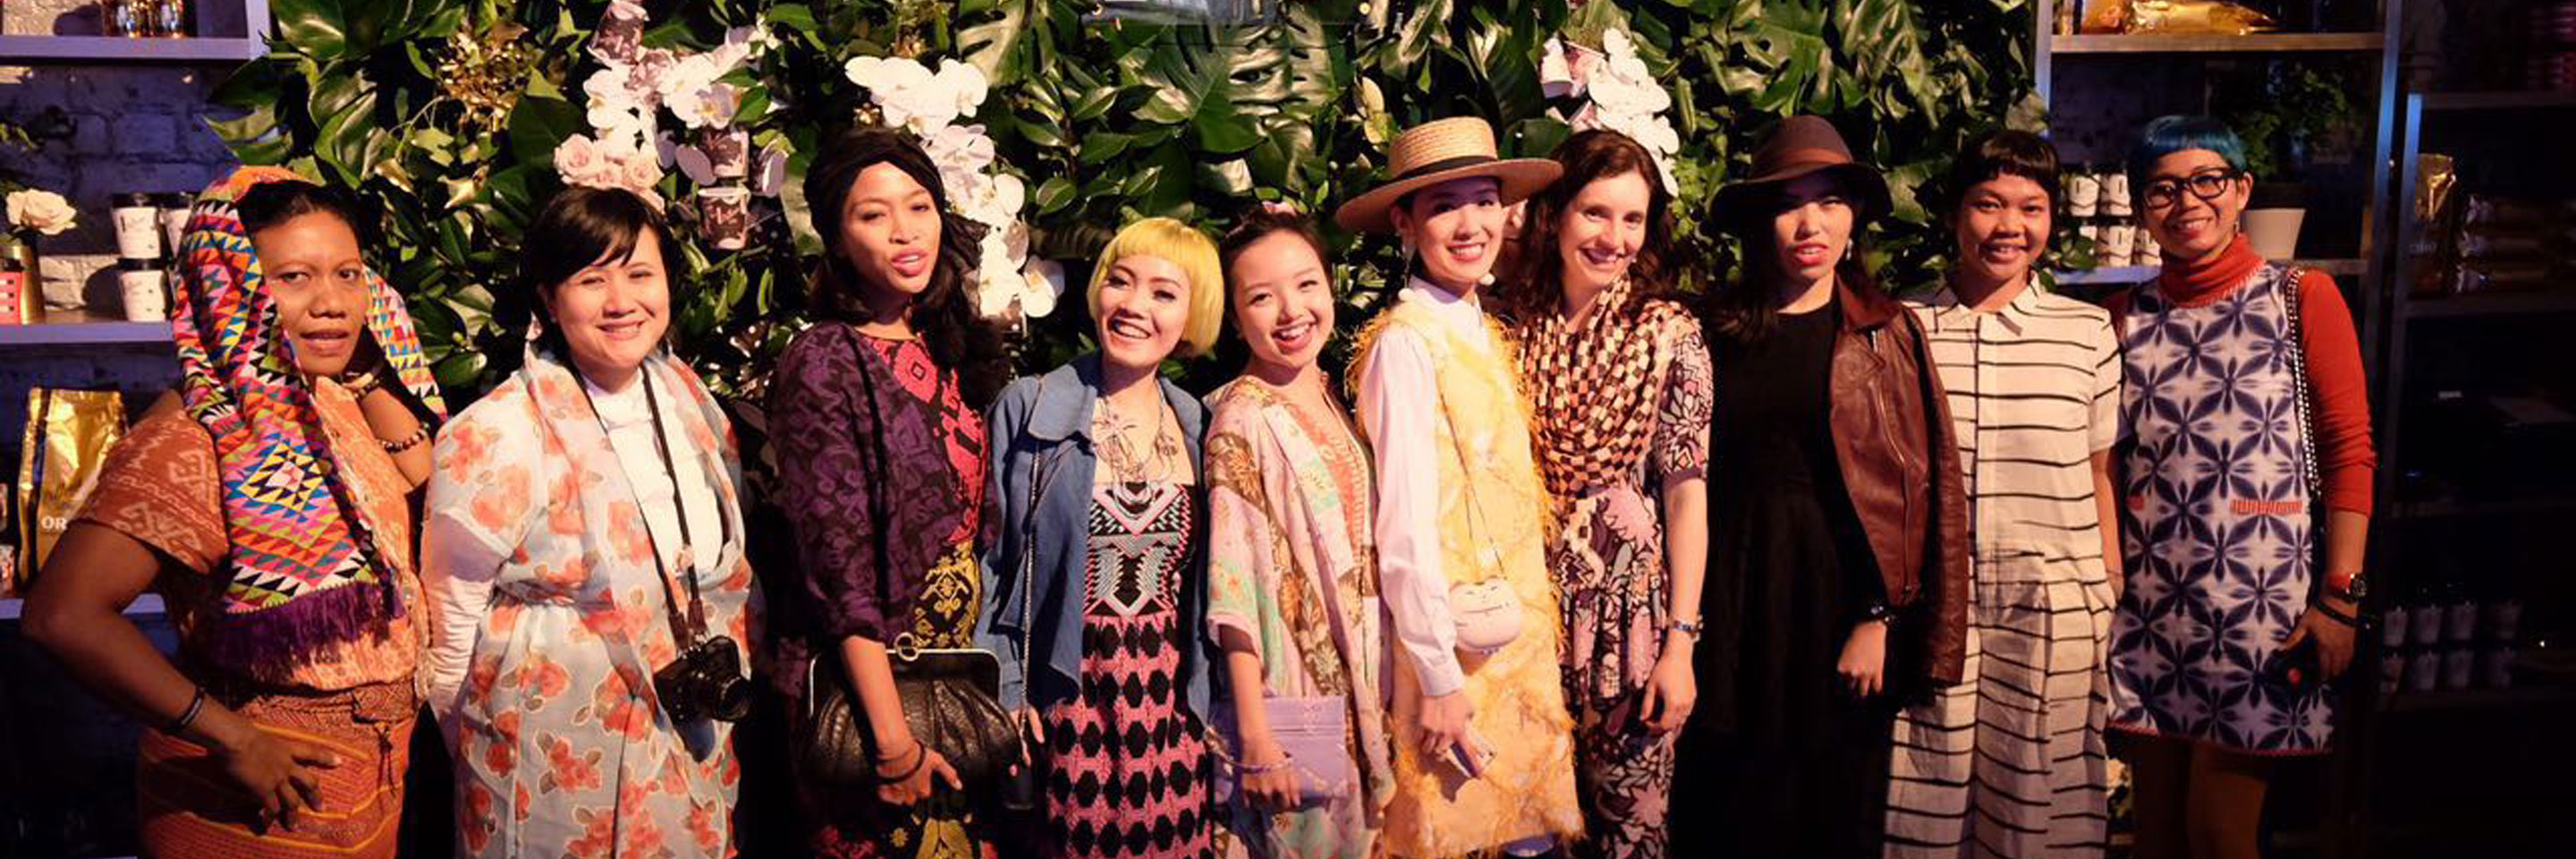 Indonesia’s next top fashion entrepreneurs visit Sydney and Brisbane to experience Australian fashion and culture under an Australia Awards short course to prepare participants for export and accessing finance and capital.